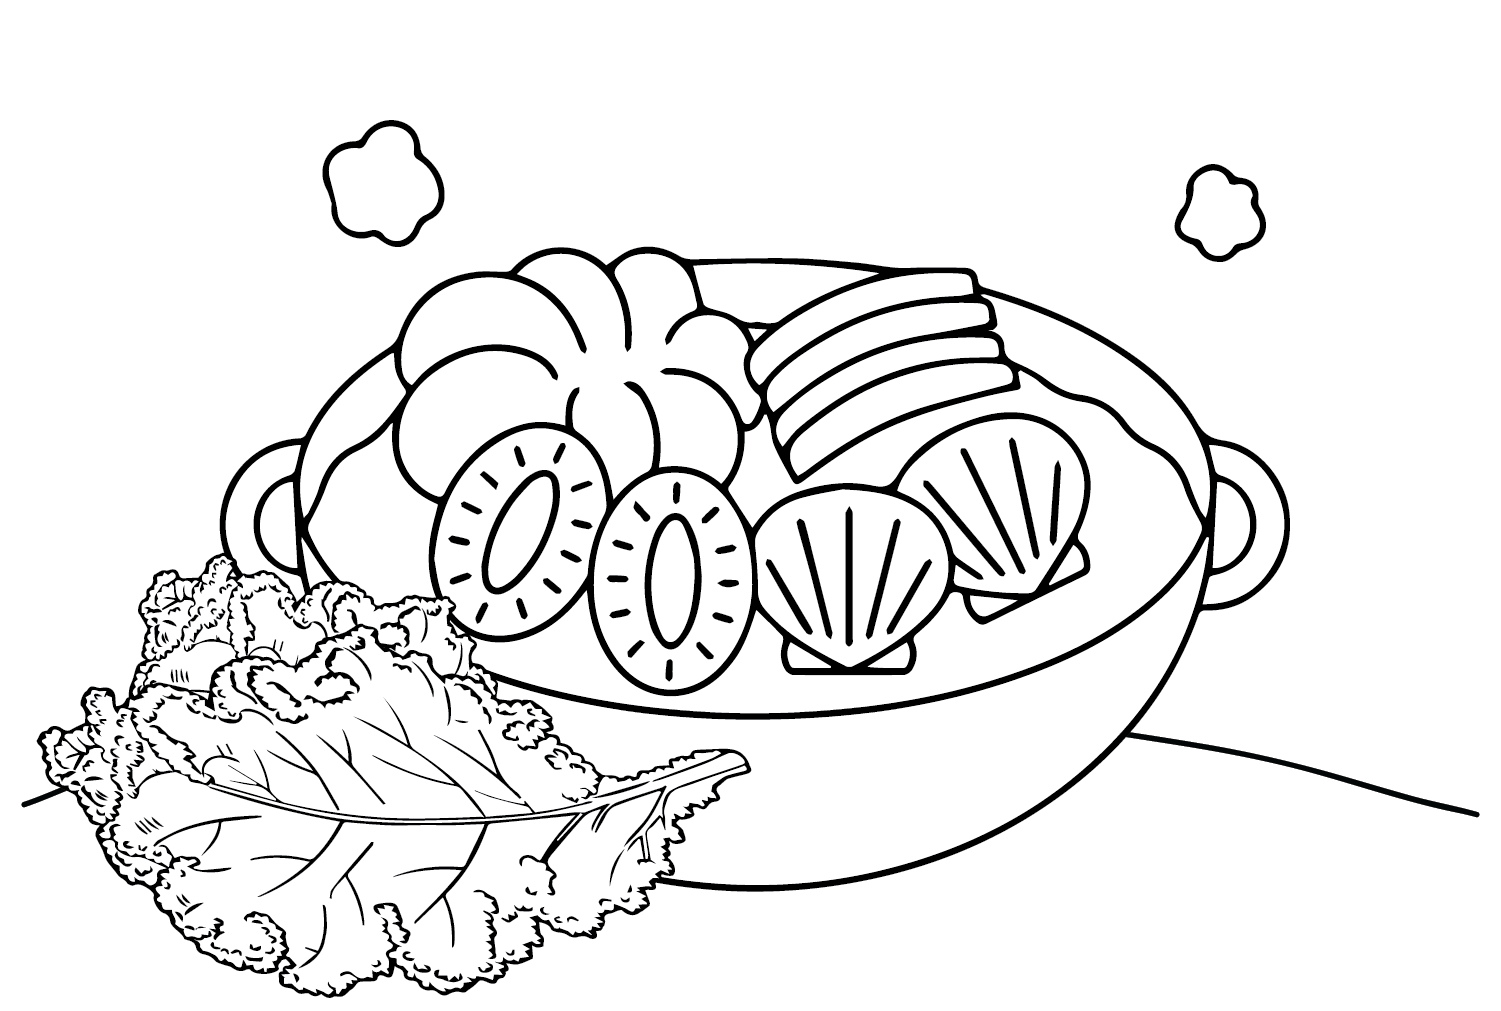 Abalone, Seafood Noodles Coloring Page from Abalone